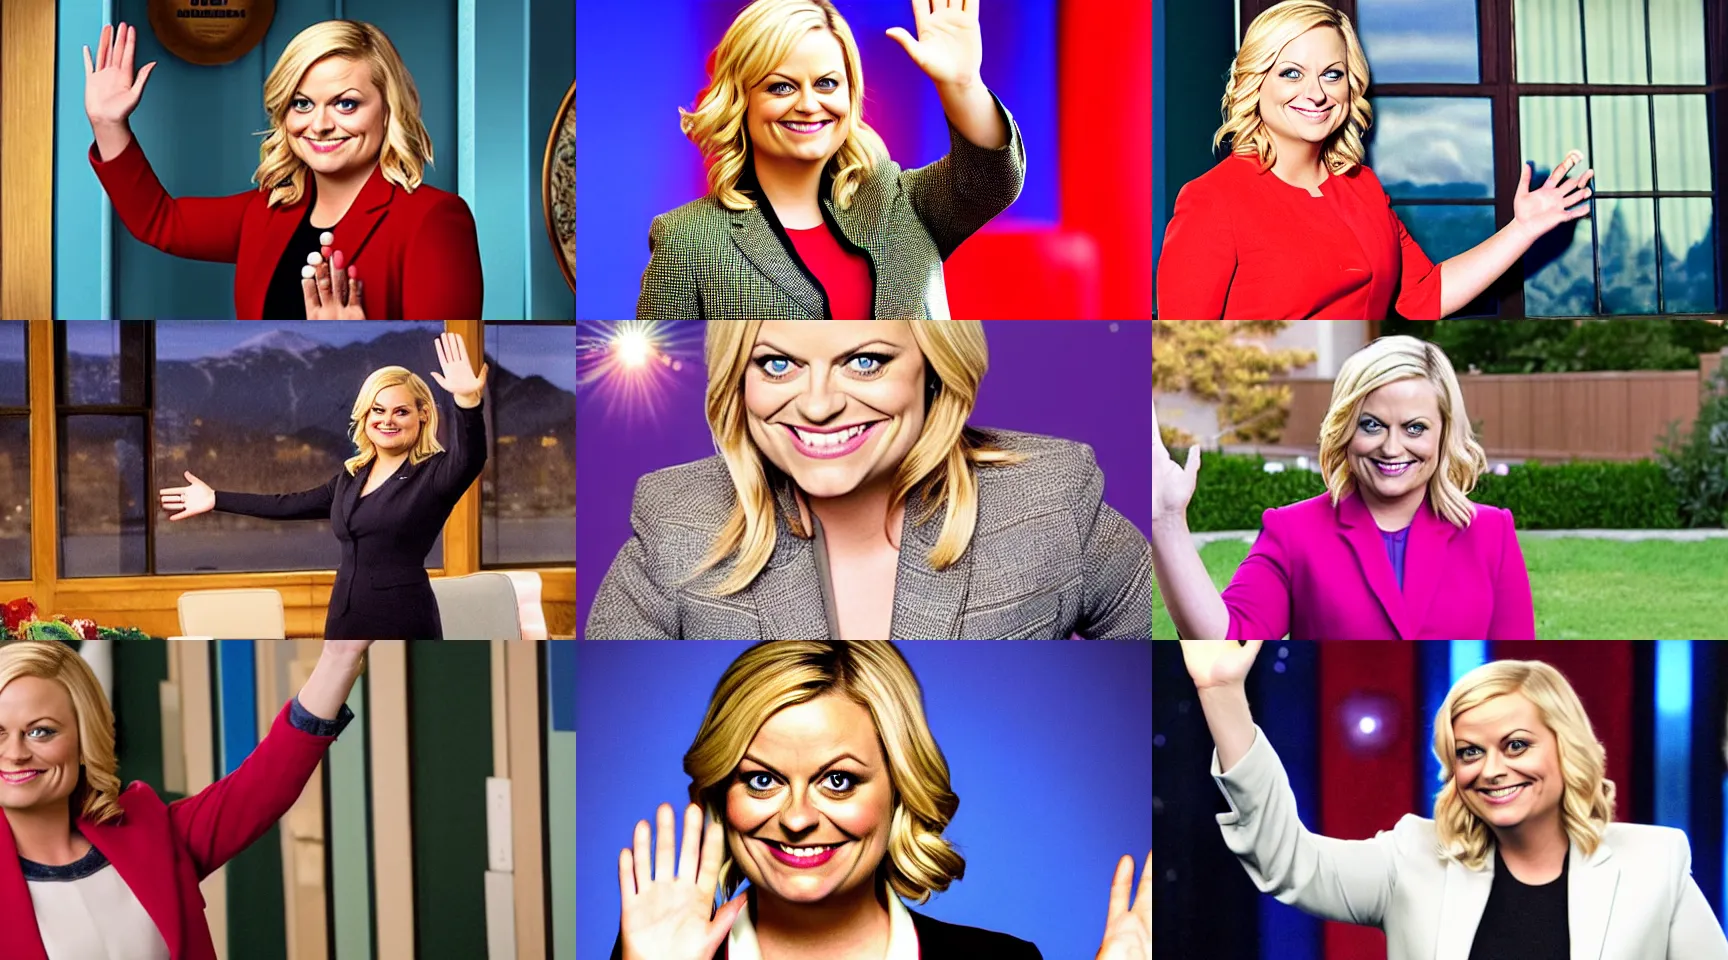 leslie knope from the tv show parks and recreation | Stable Diffusion ...